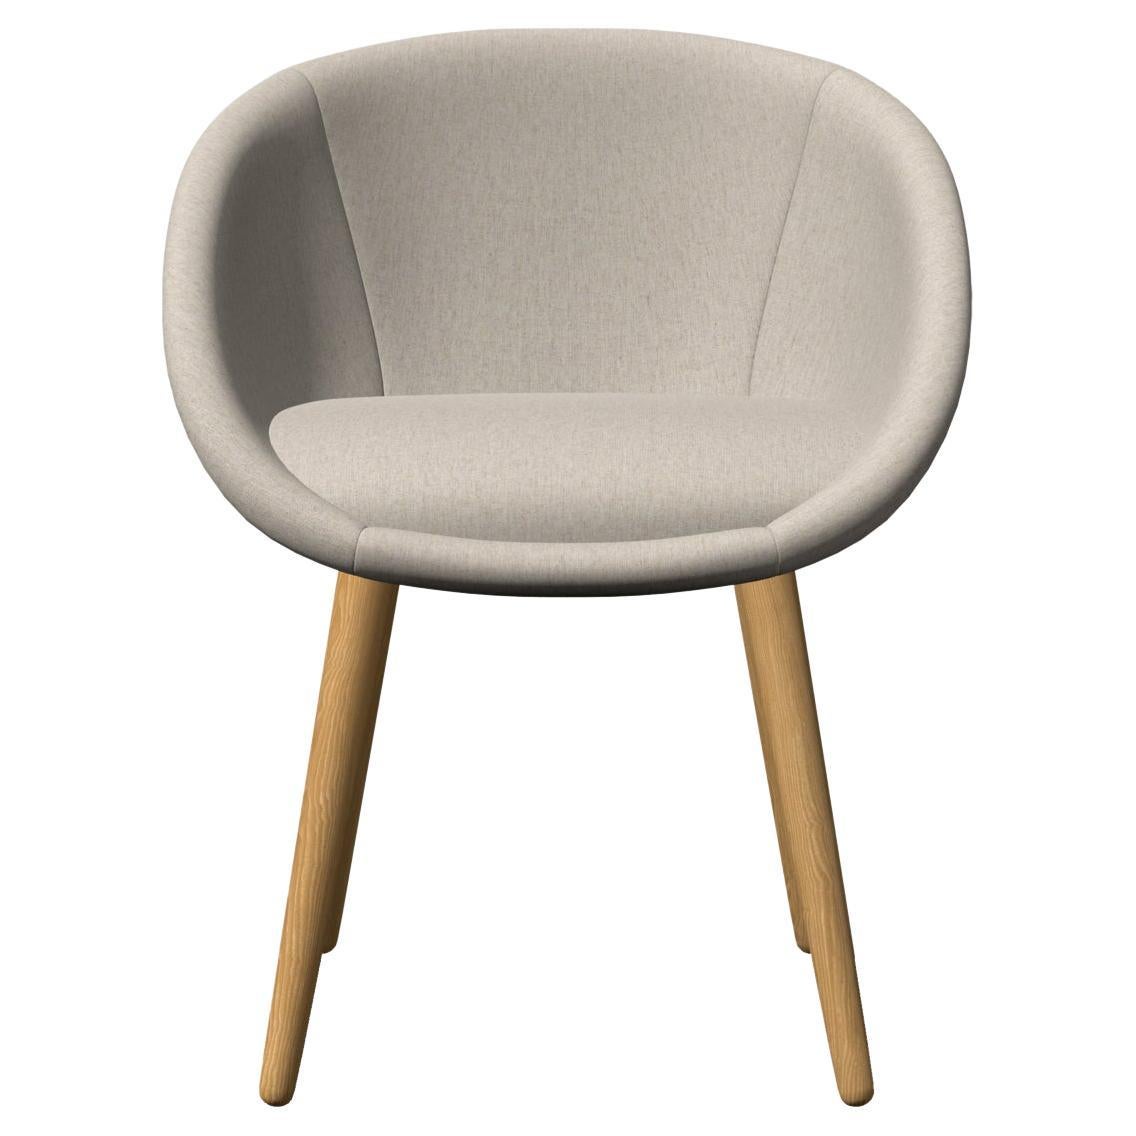 Moooi Love Dining Chair in Divina MD, 213 Beige Upholstery & White Wash Oak Legs